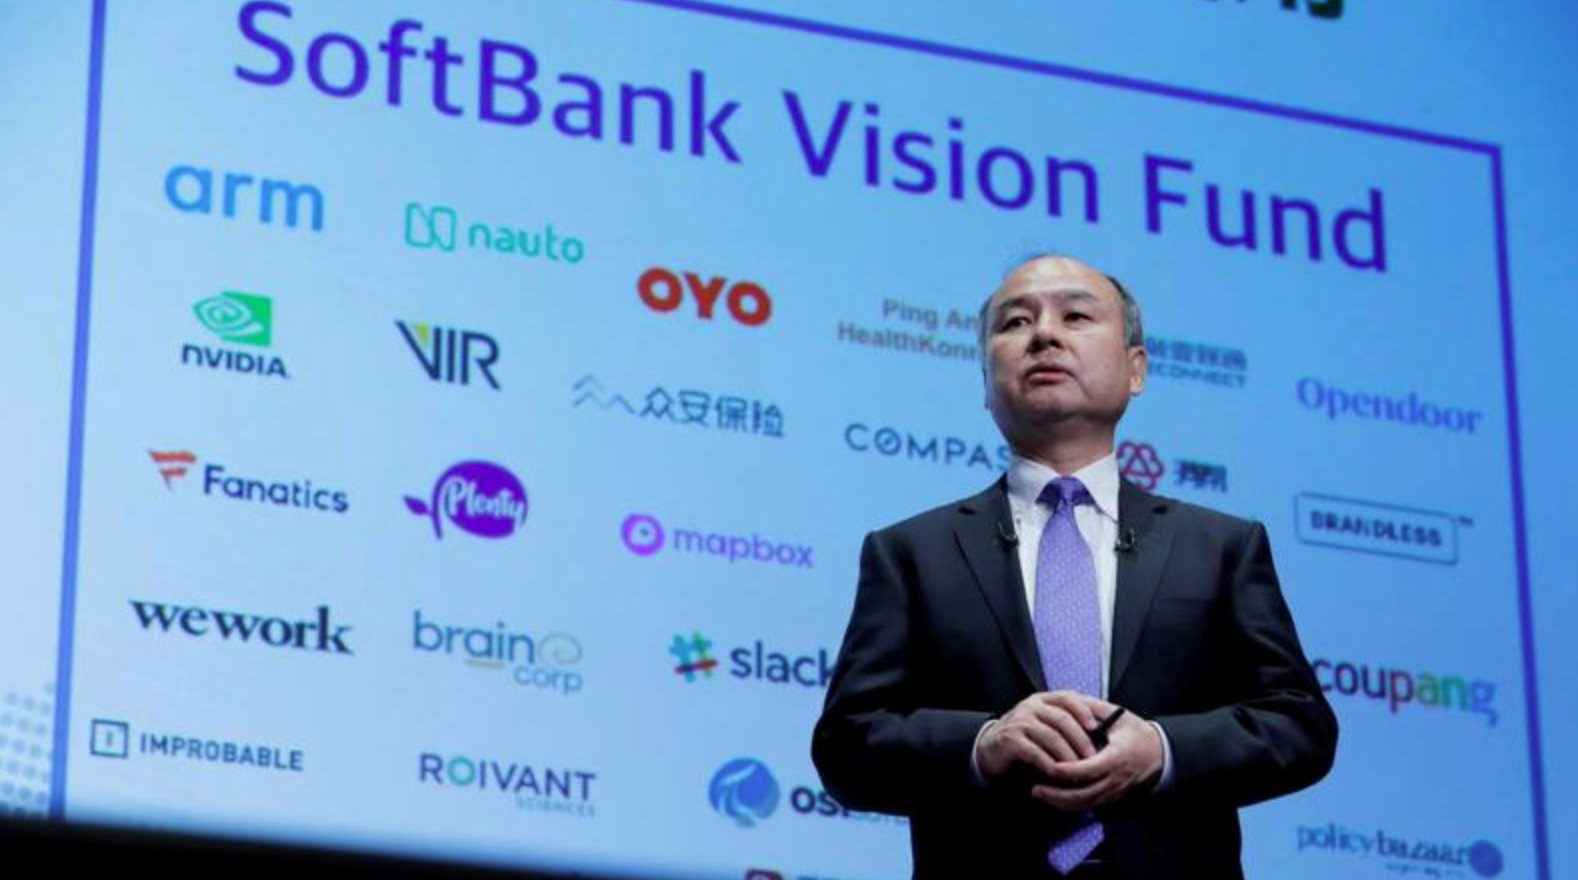 The 'virtual universe king' position of Meta, Microsoft shaken by a startup Improbable backed by SoftBank.